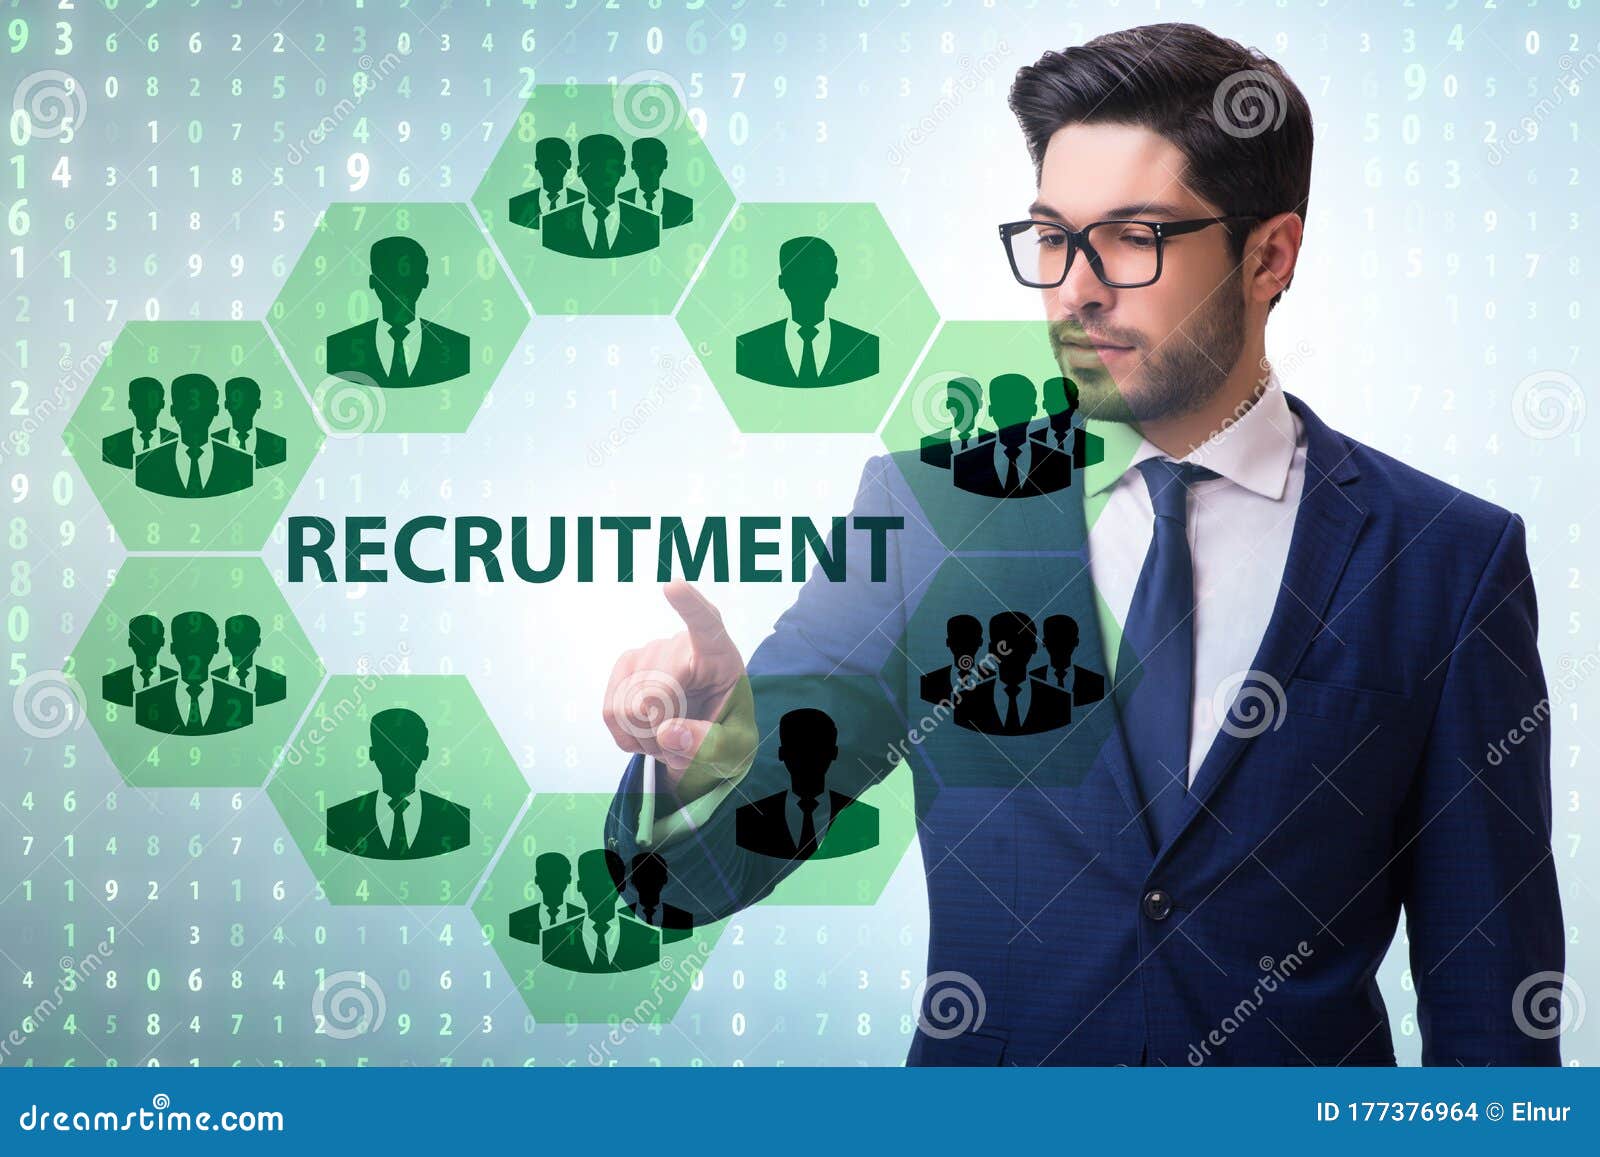 Using recruiters your job search